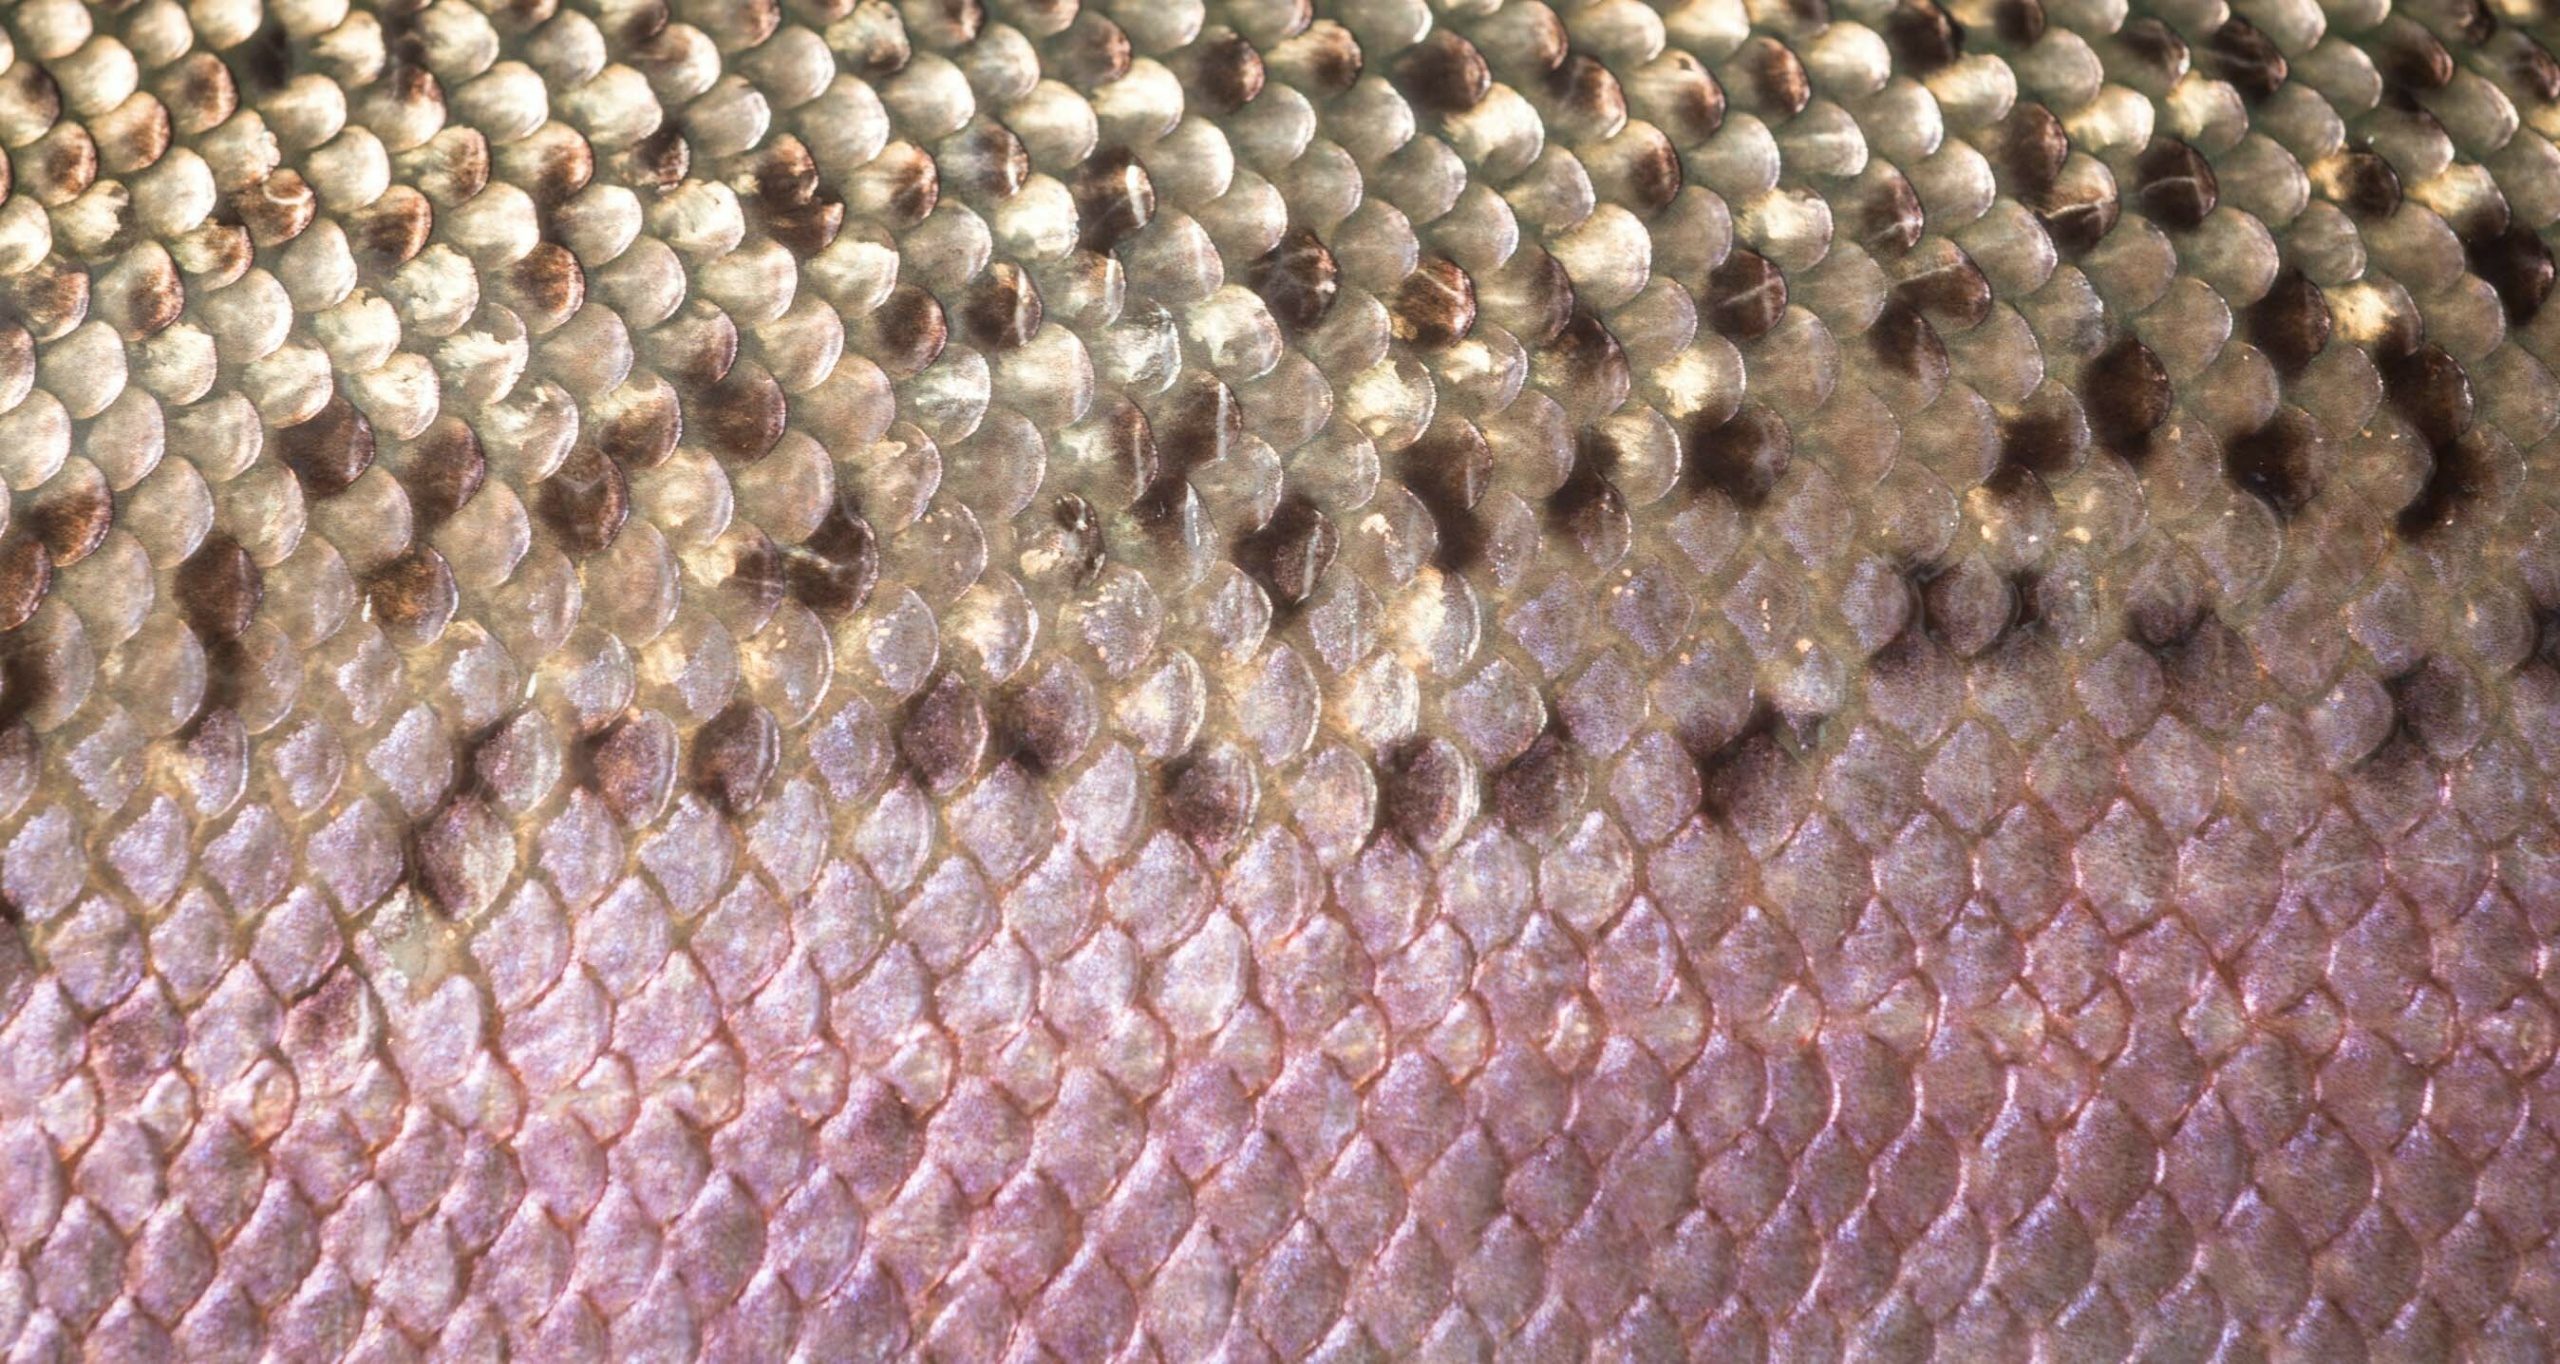 Rainbow trout skin scales, detail